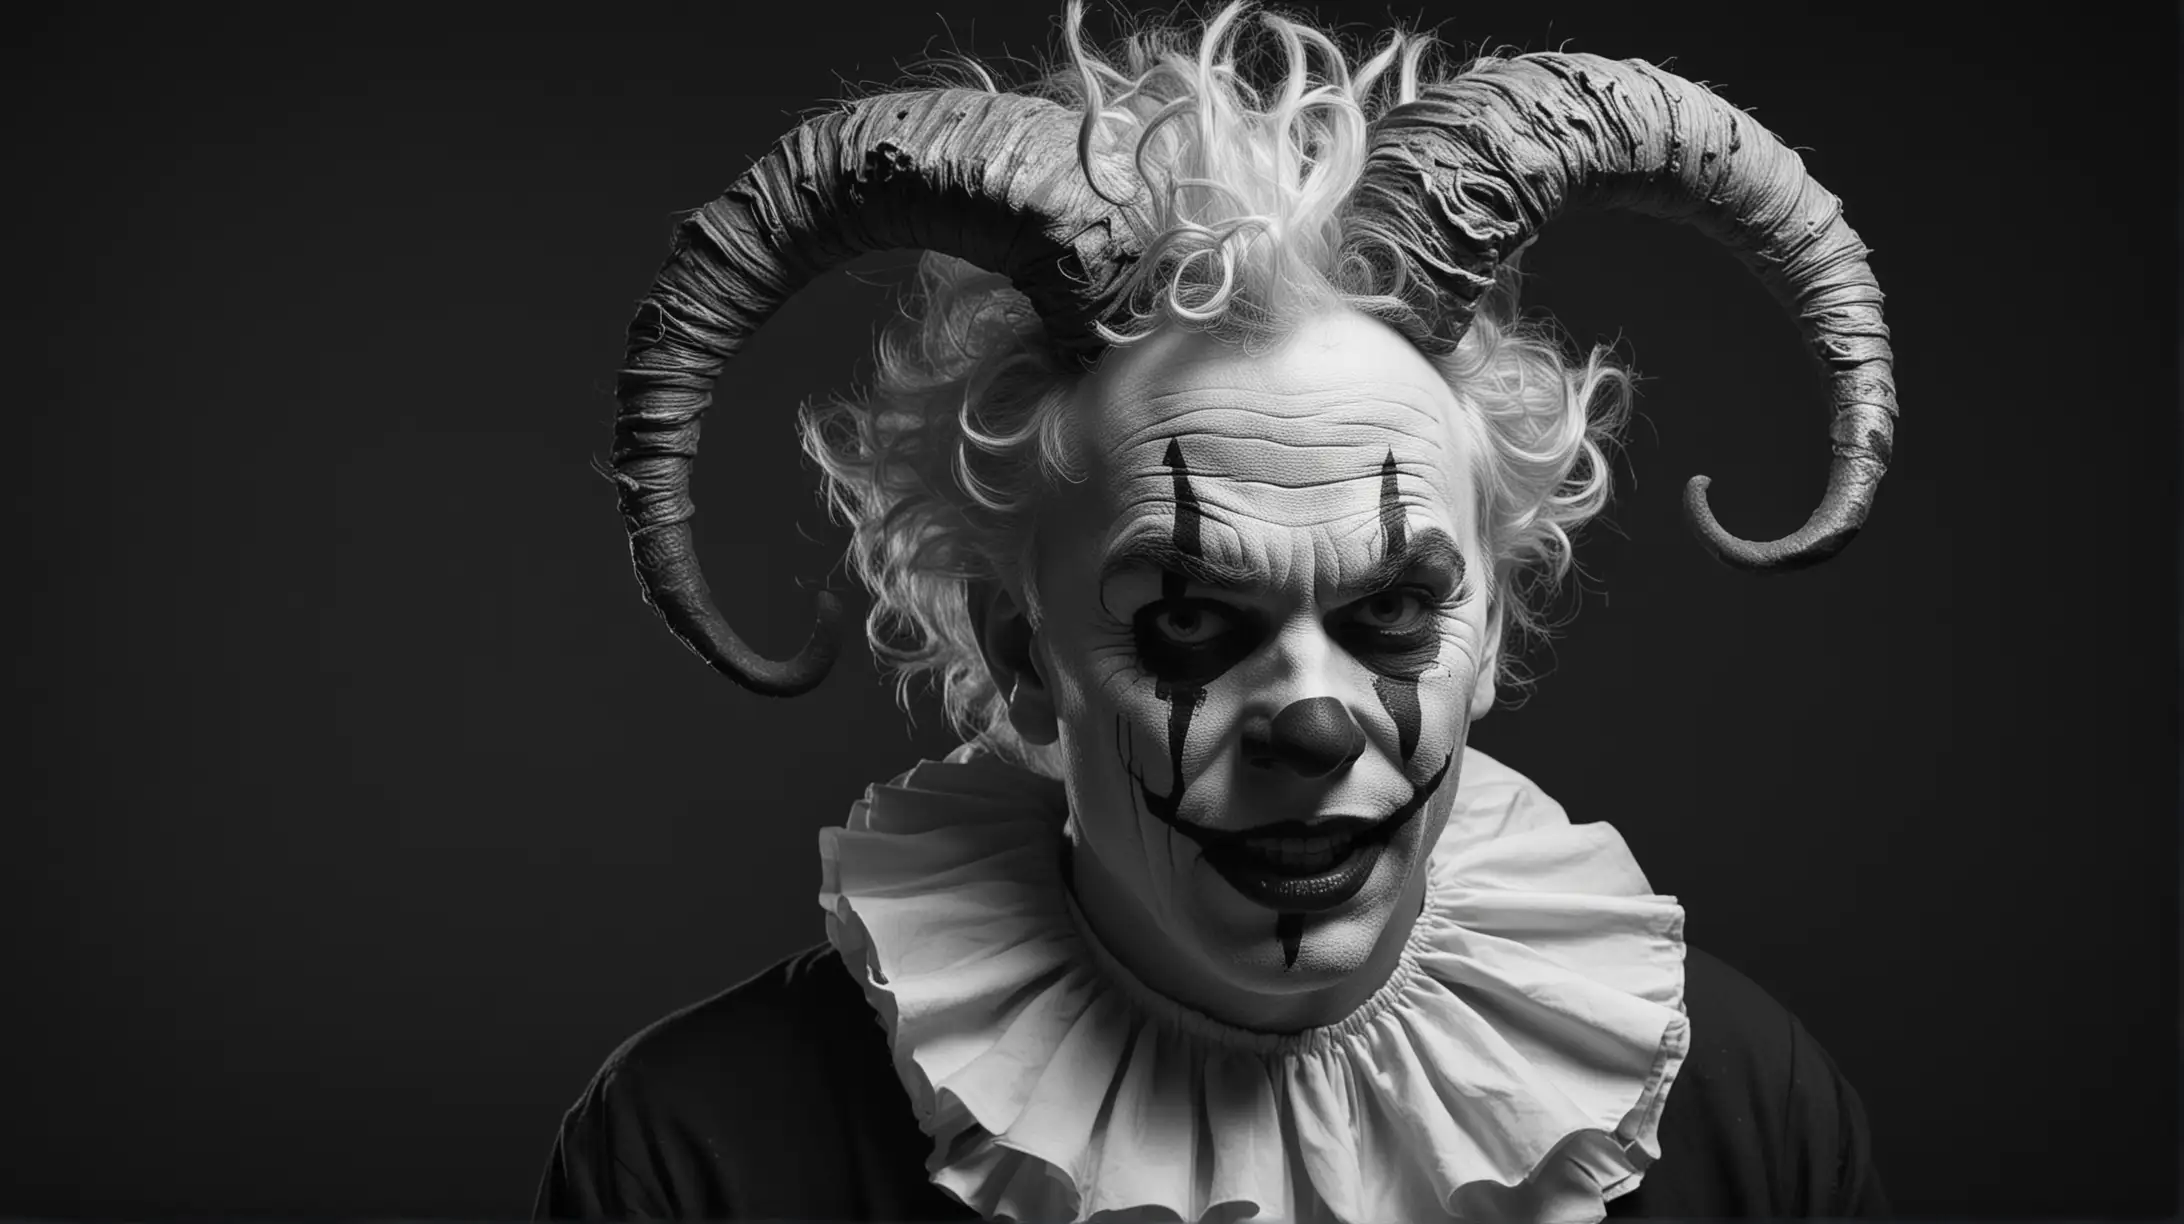 Surreal Portrait of a Depressed Clown with Curly Horns on Black Background